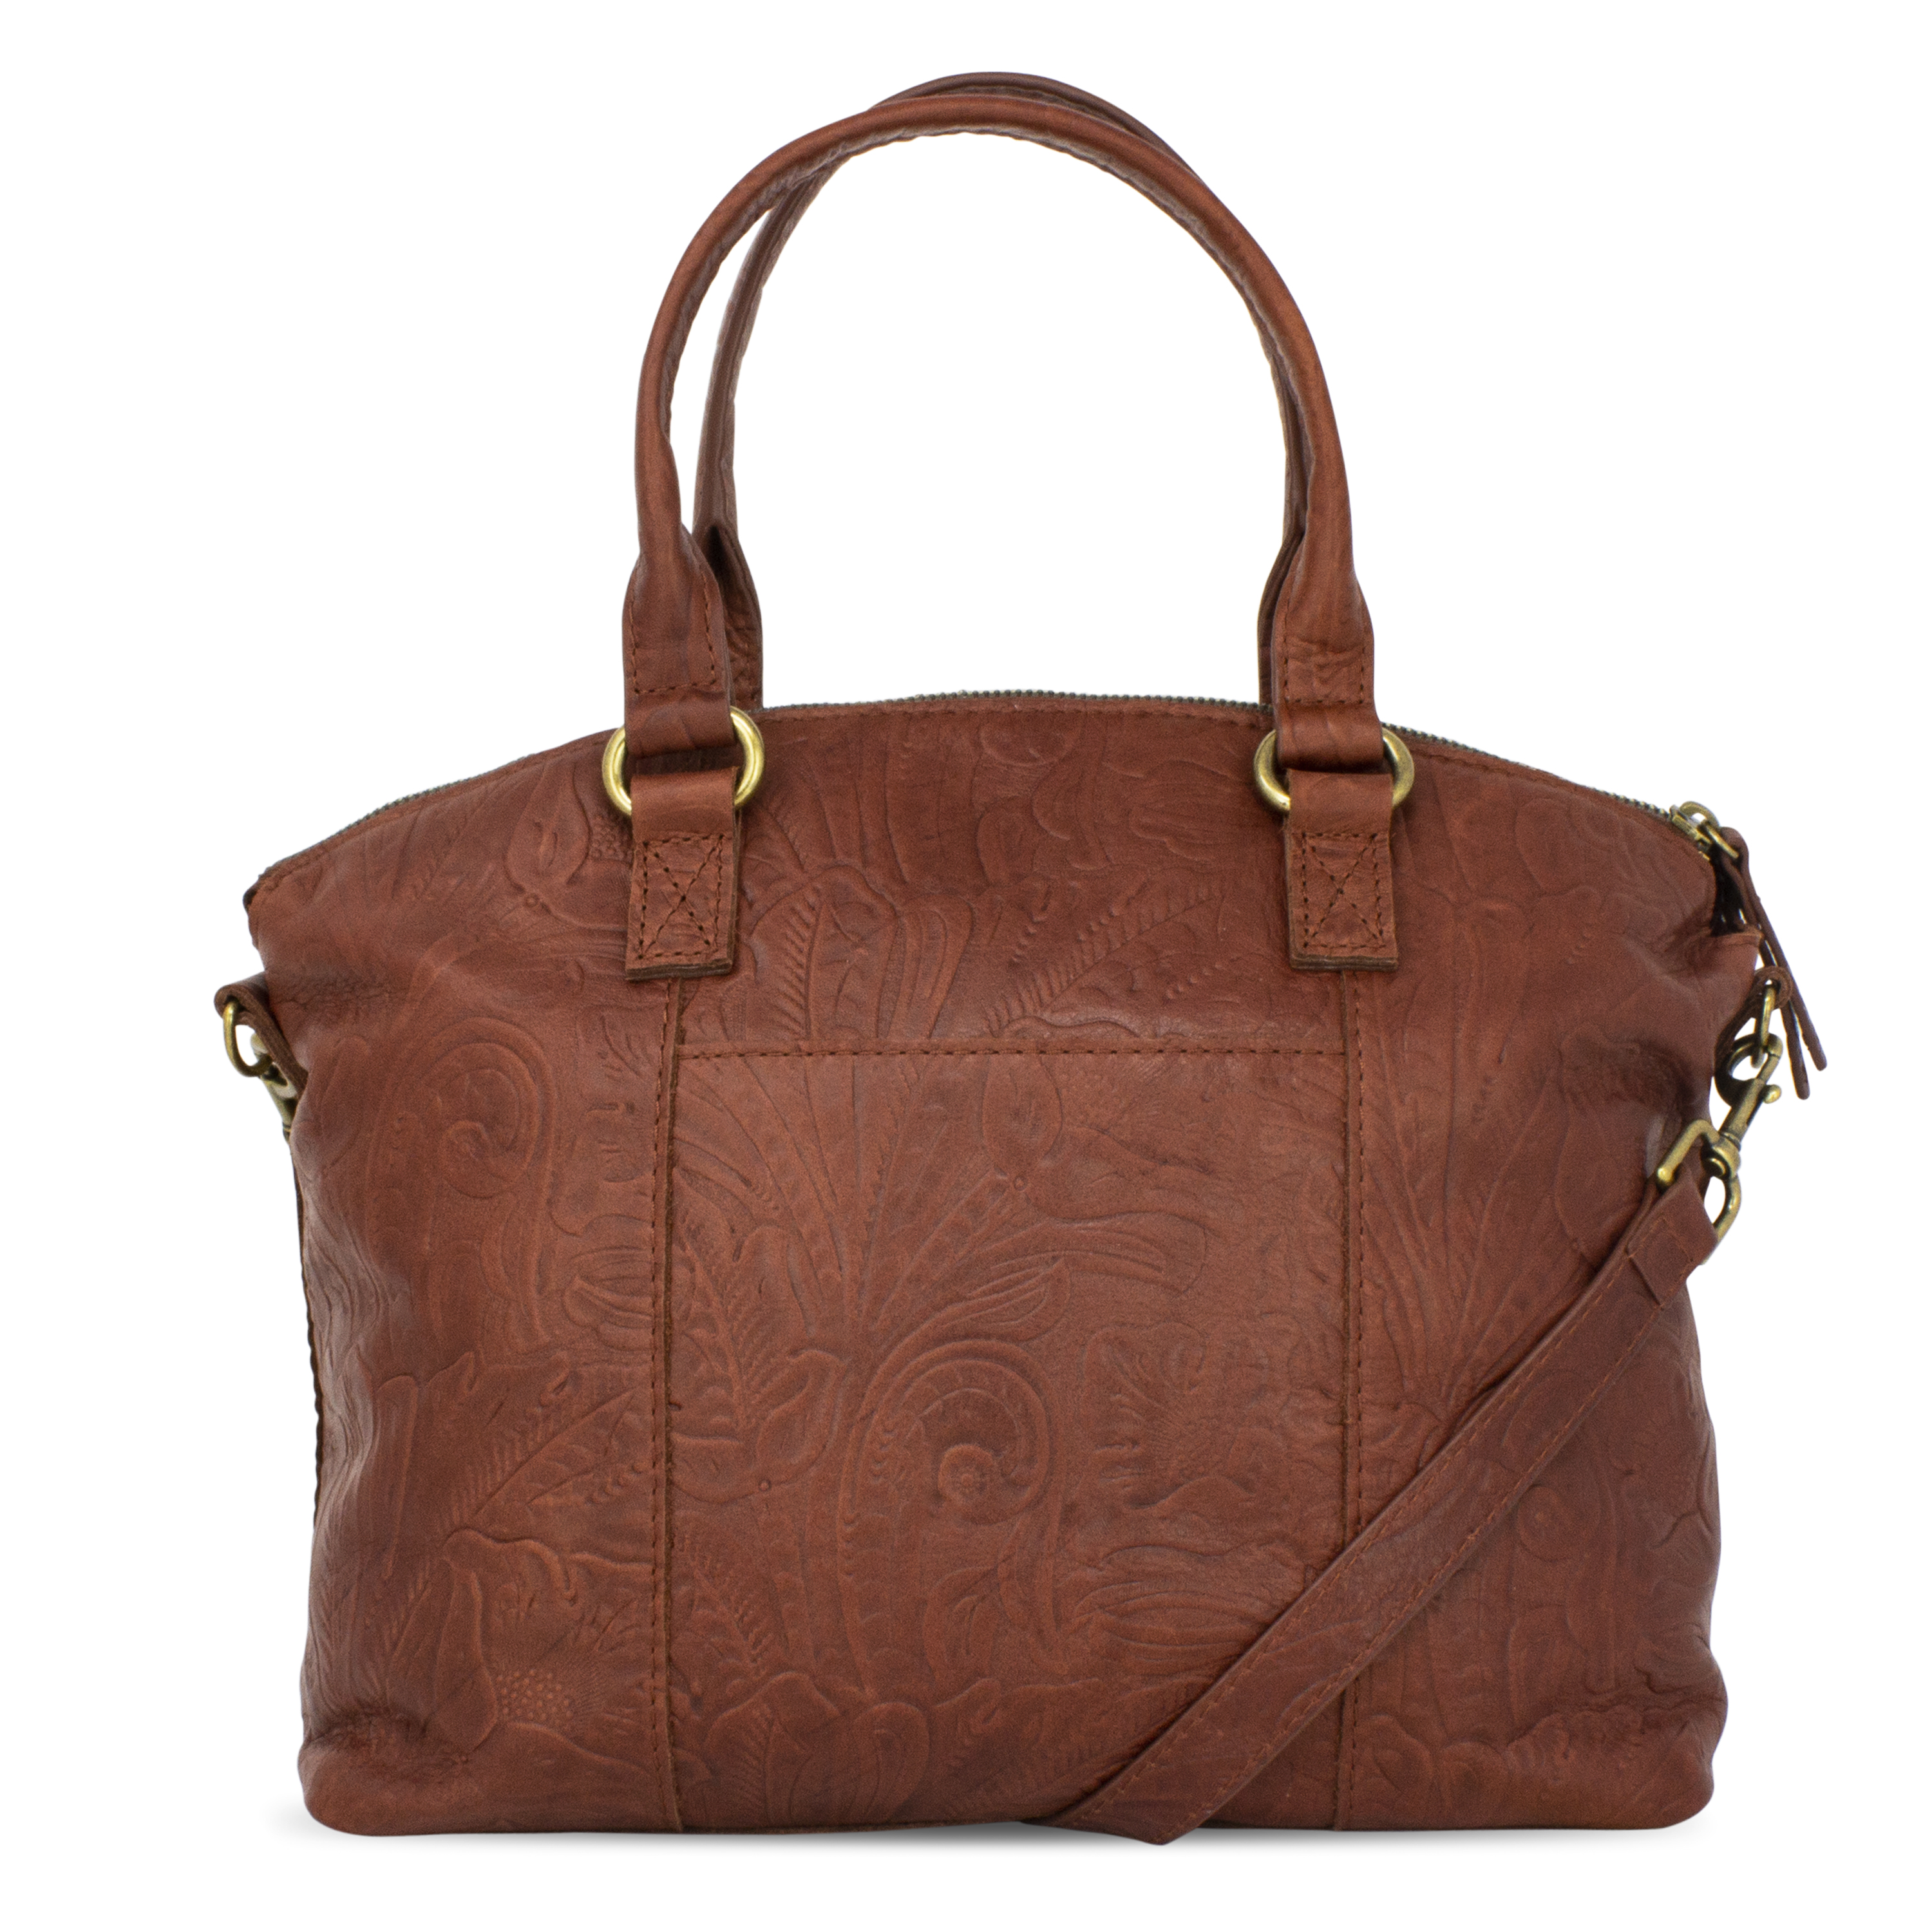 American Leather Co. Carrie Tooled Leather Dome Satchel